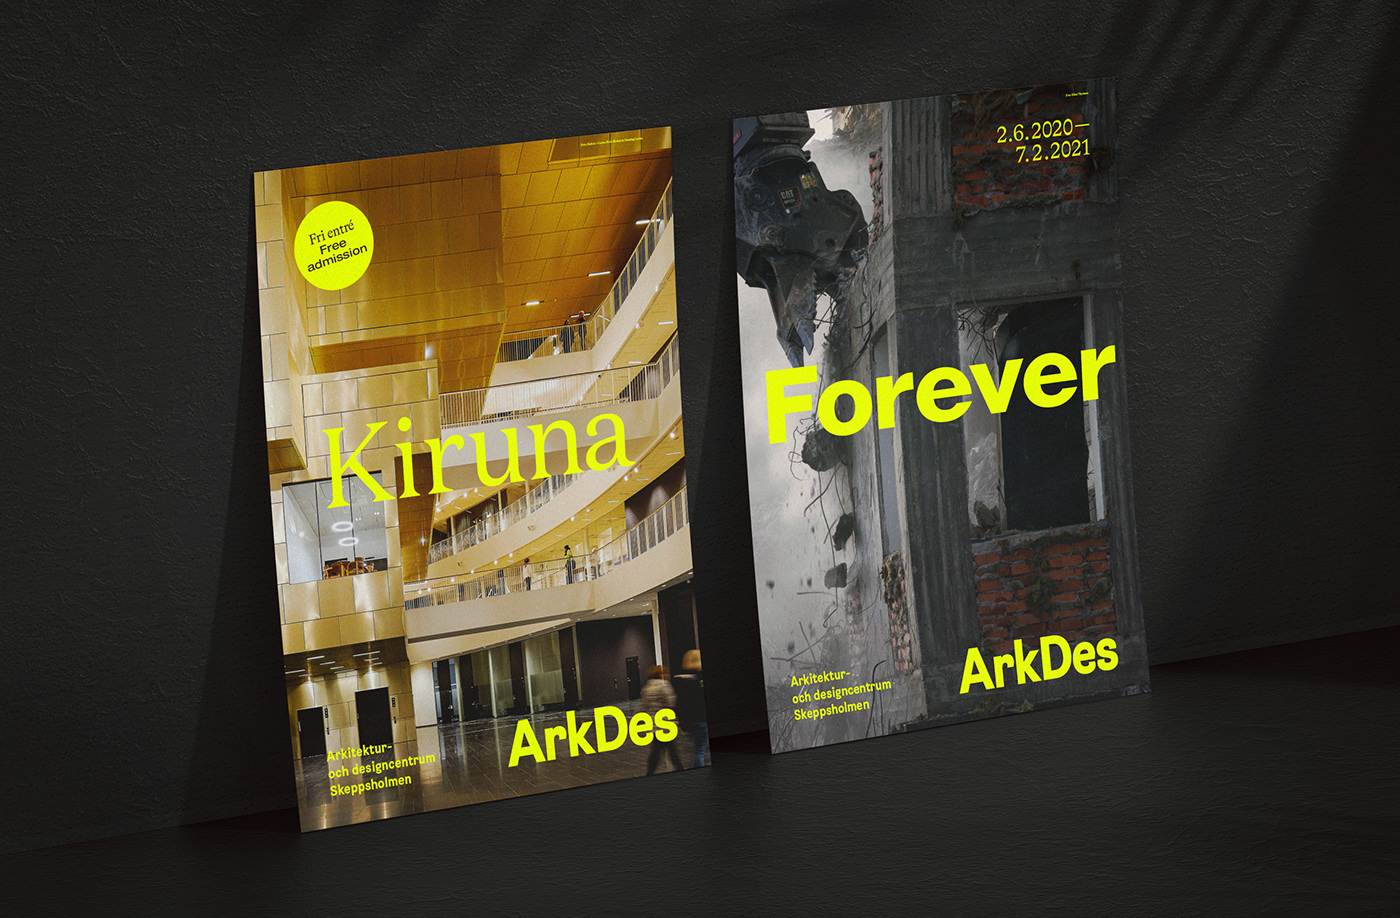 The Brand Identity of the Kiruna Forever Exhibition